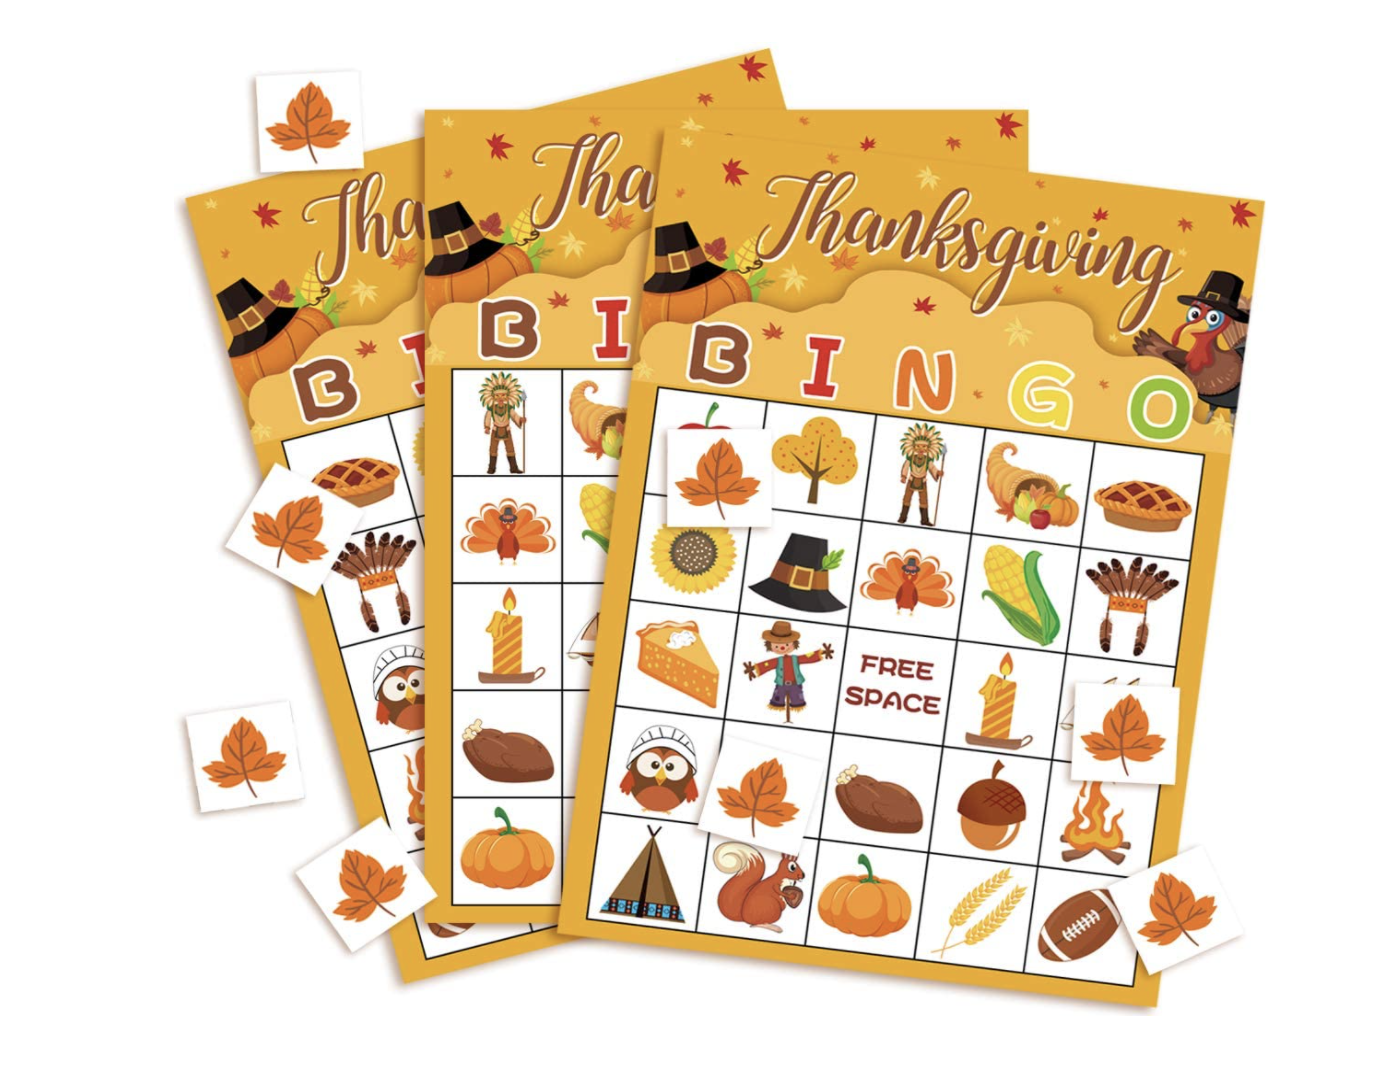 3omething New Thanksgiving Games Fall Bingo Cards for Kids School Class Party Activity Supplies -24 Players